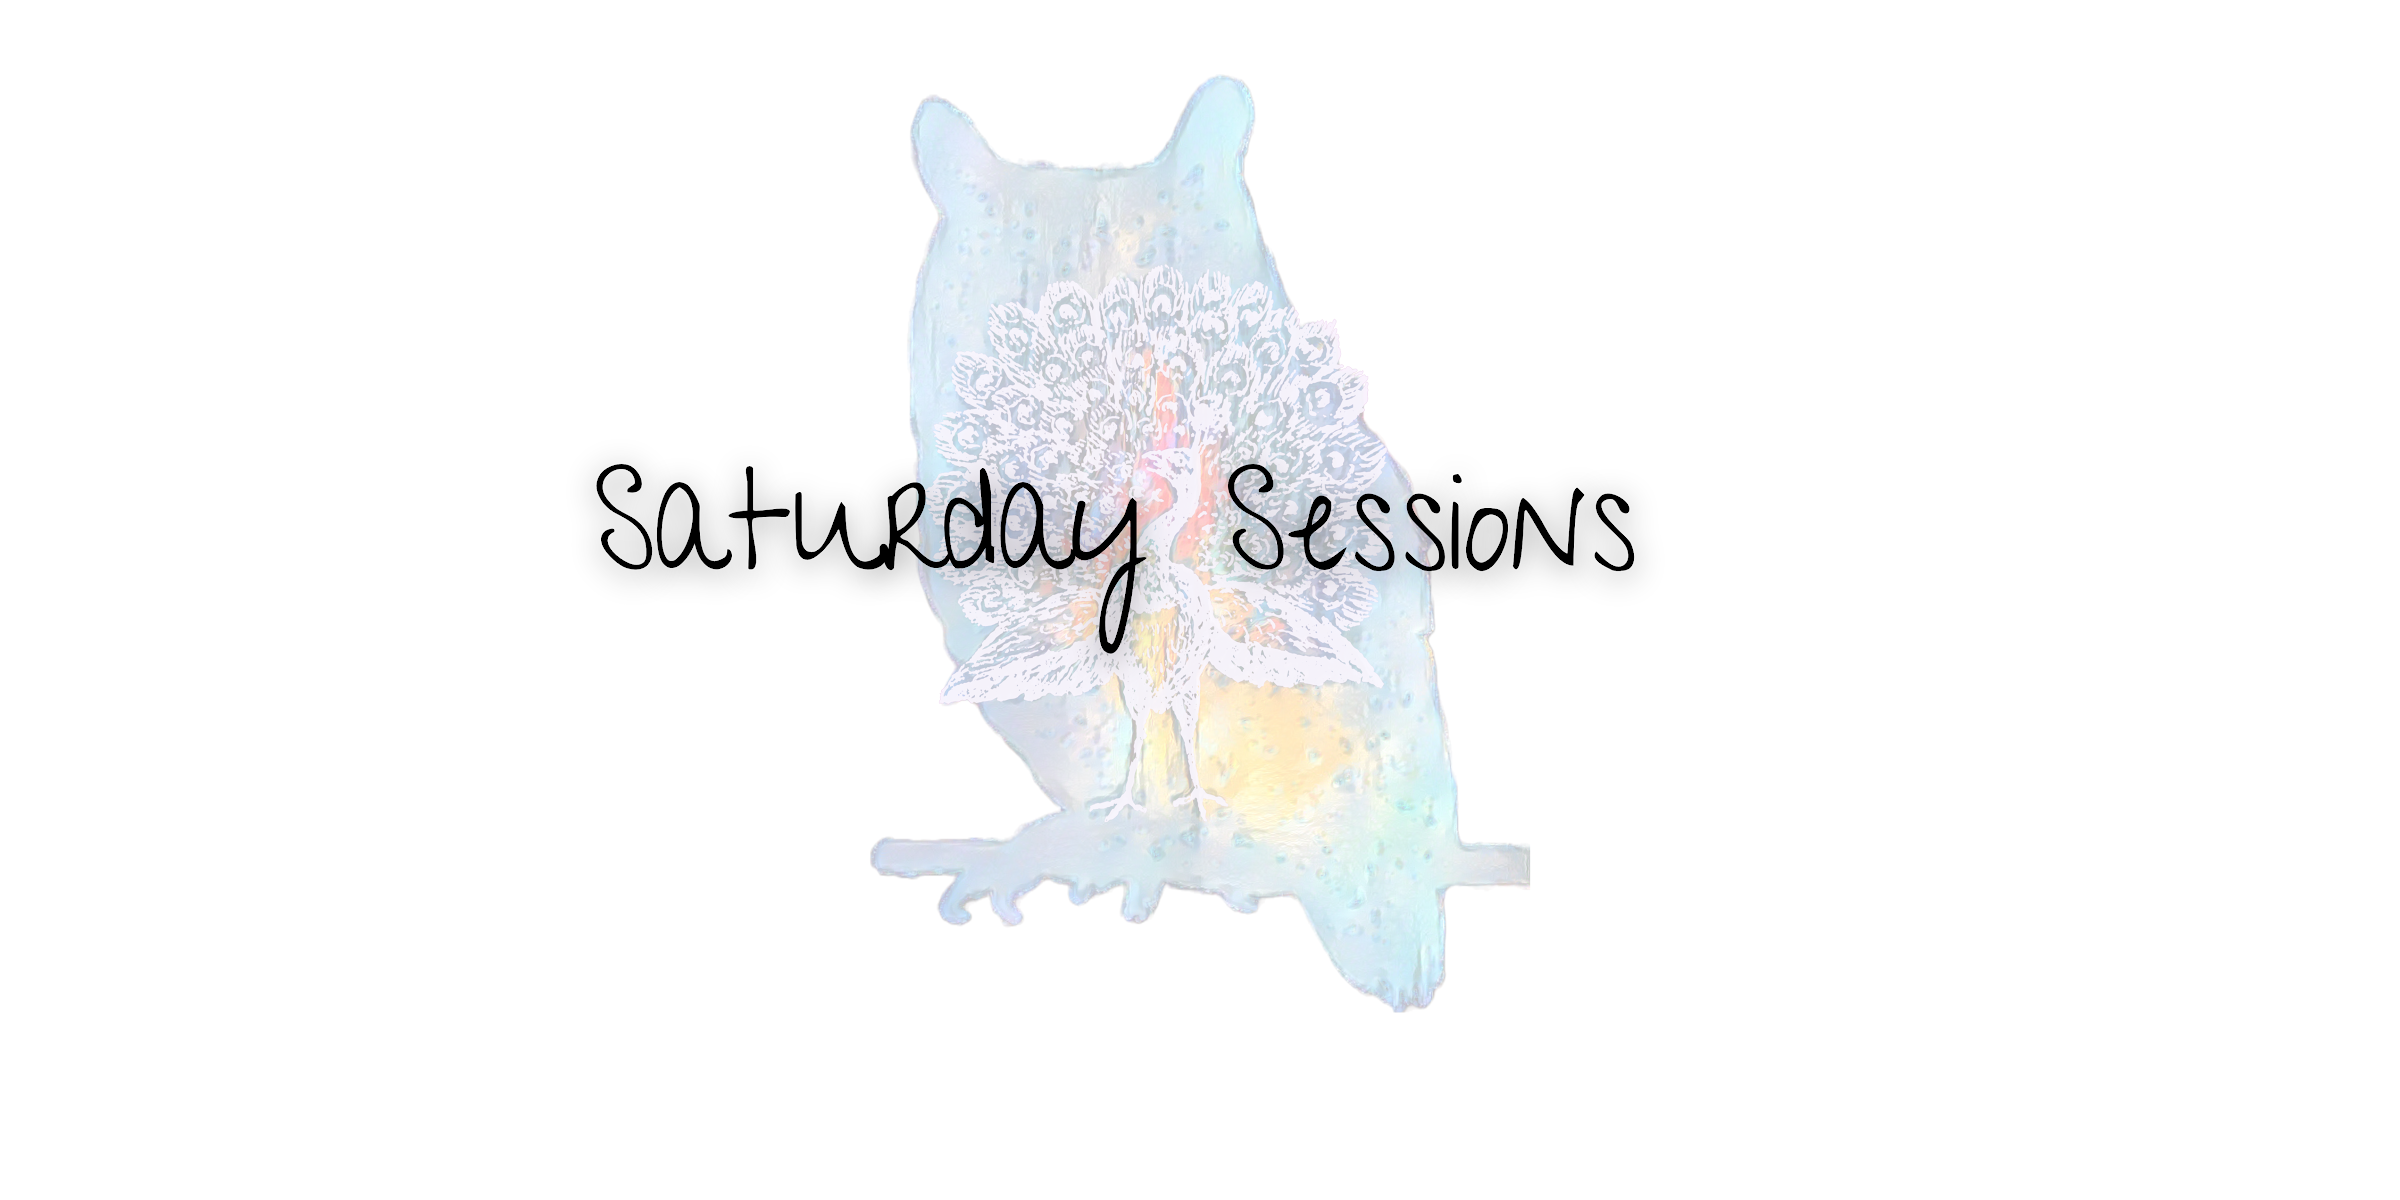 Saturday Sessions: My Experience with Mindfulness Meditation: A Tool for Managing Anxiety